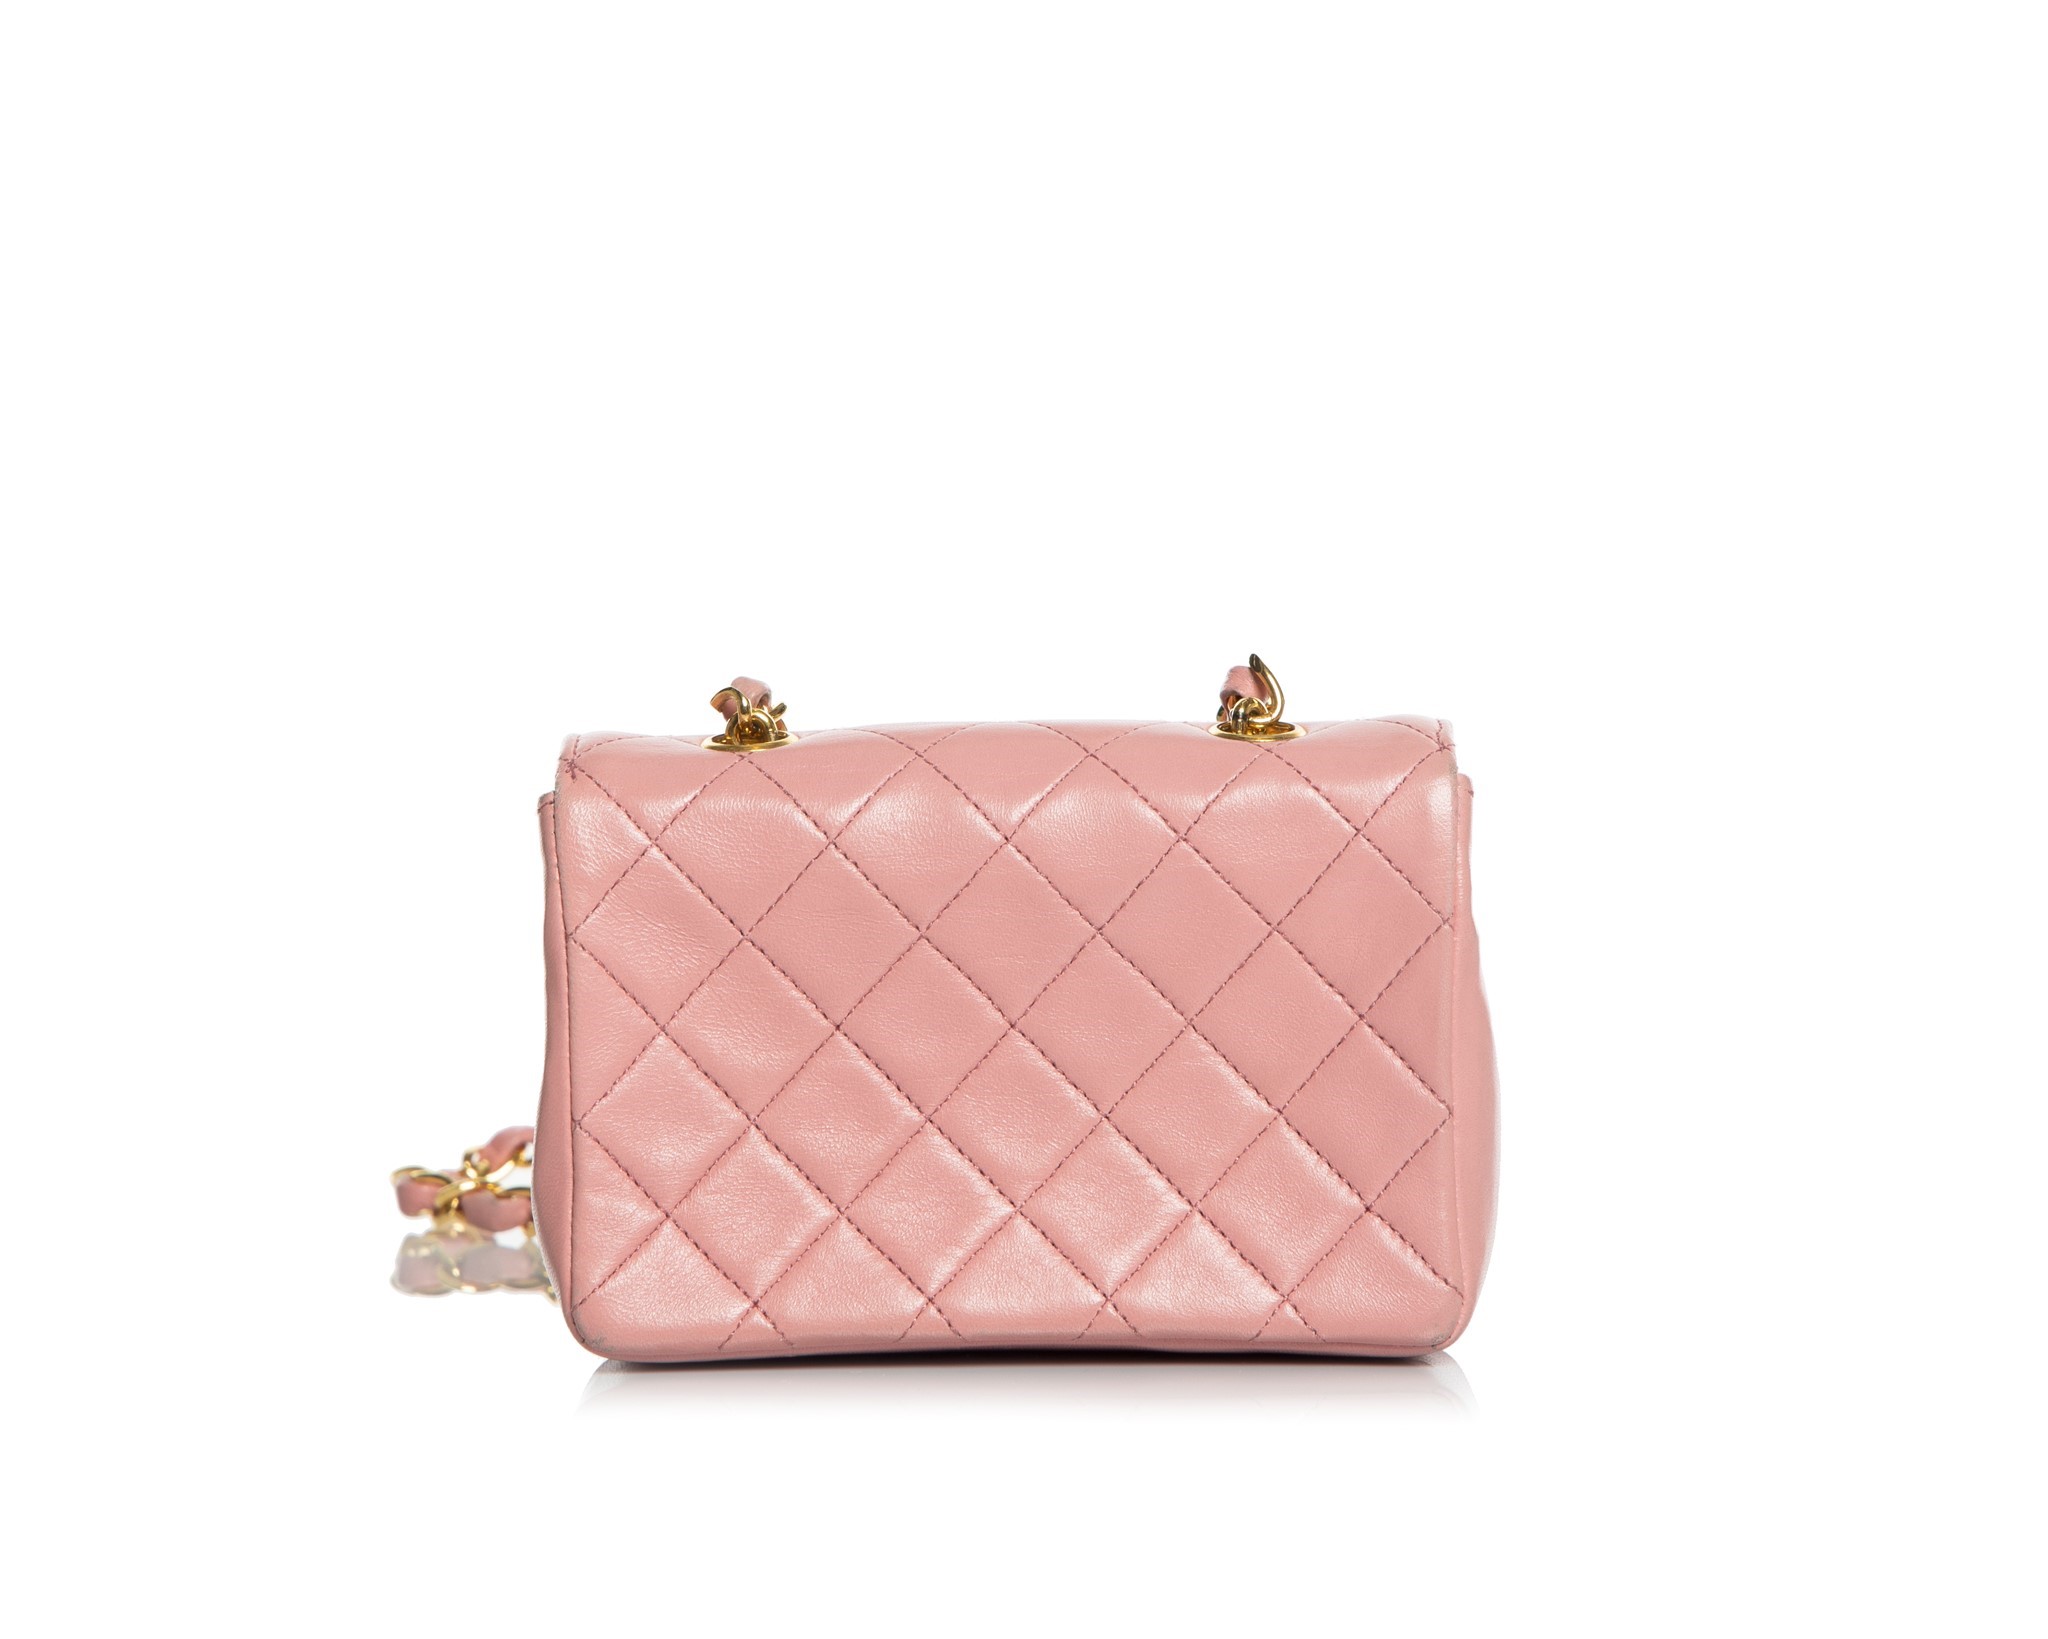 Timeless/classique leather mini bag Chanel Pink in Leather - 31972924